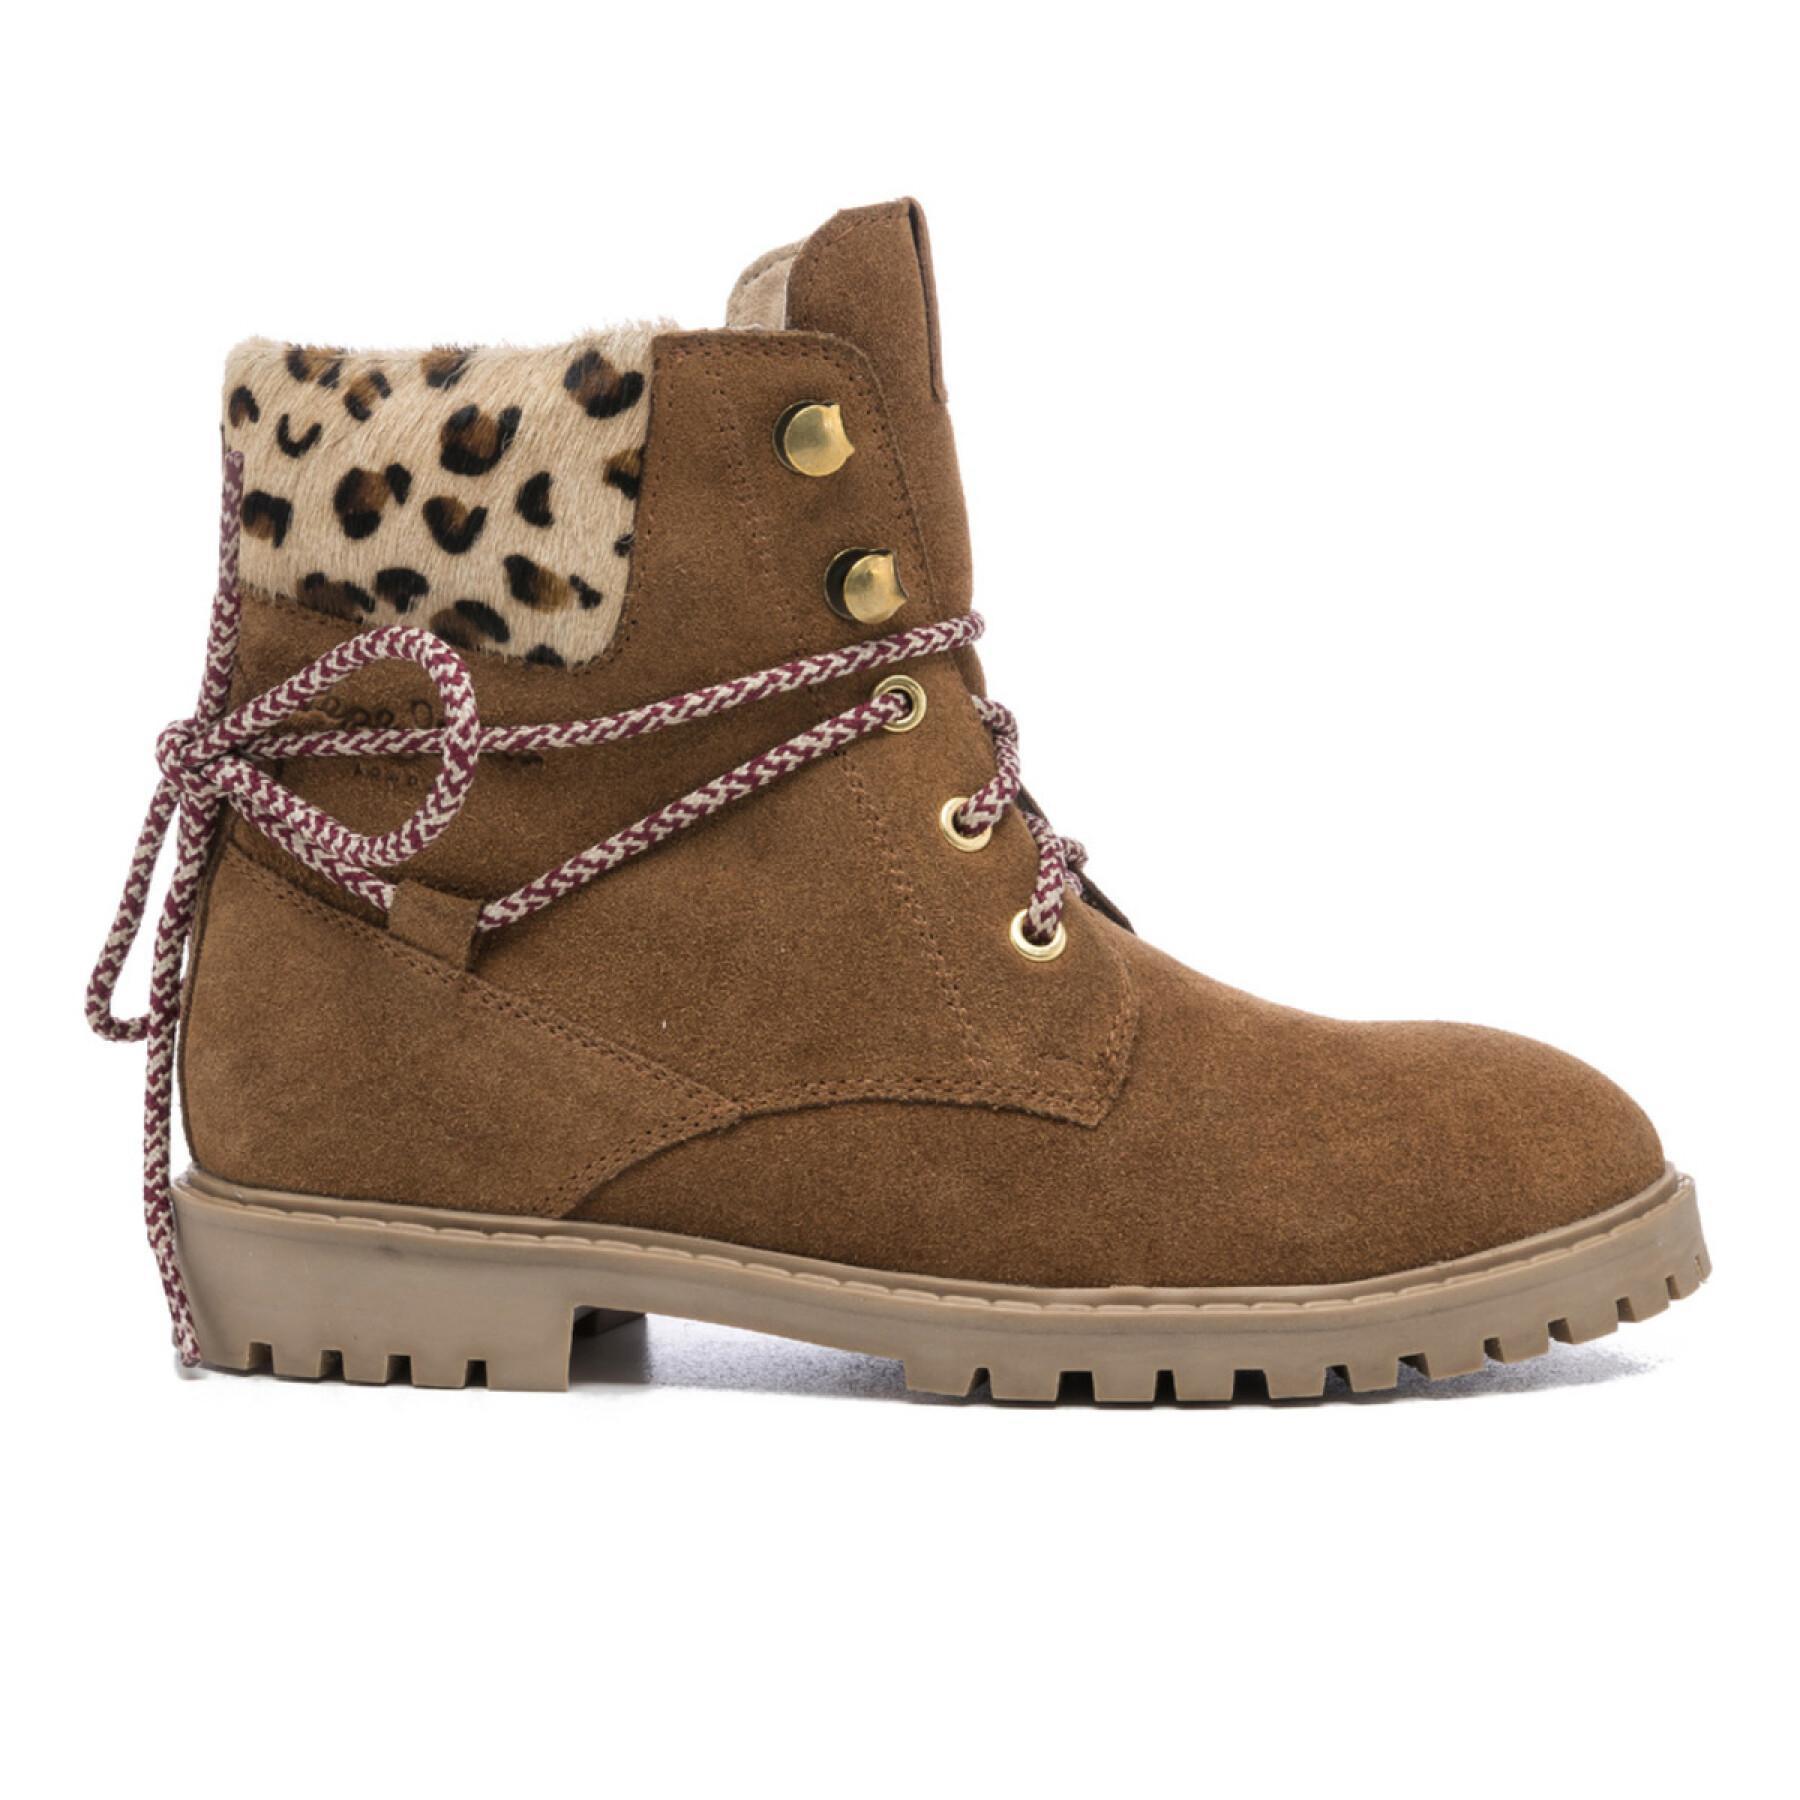 Girl's boots Pepe Jeans Pulp